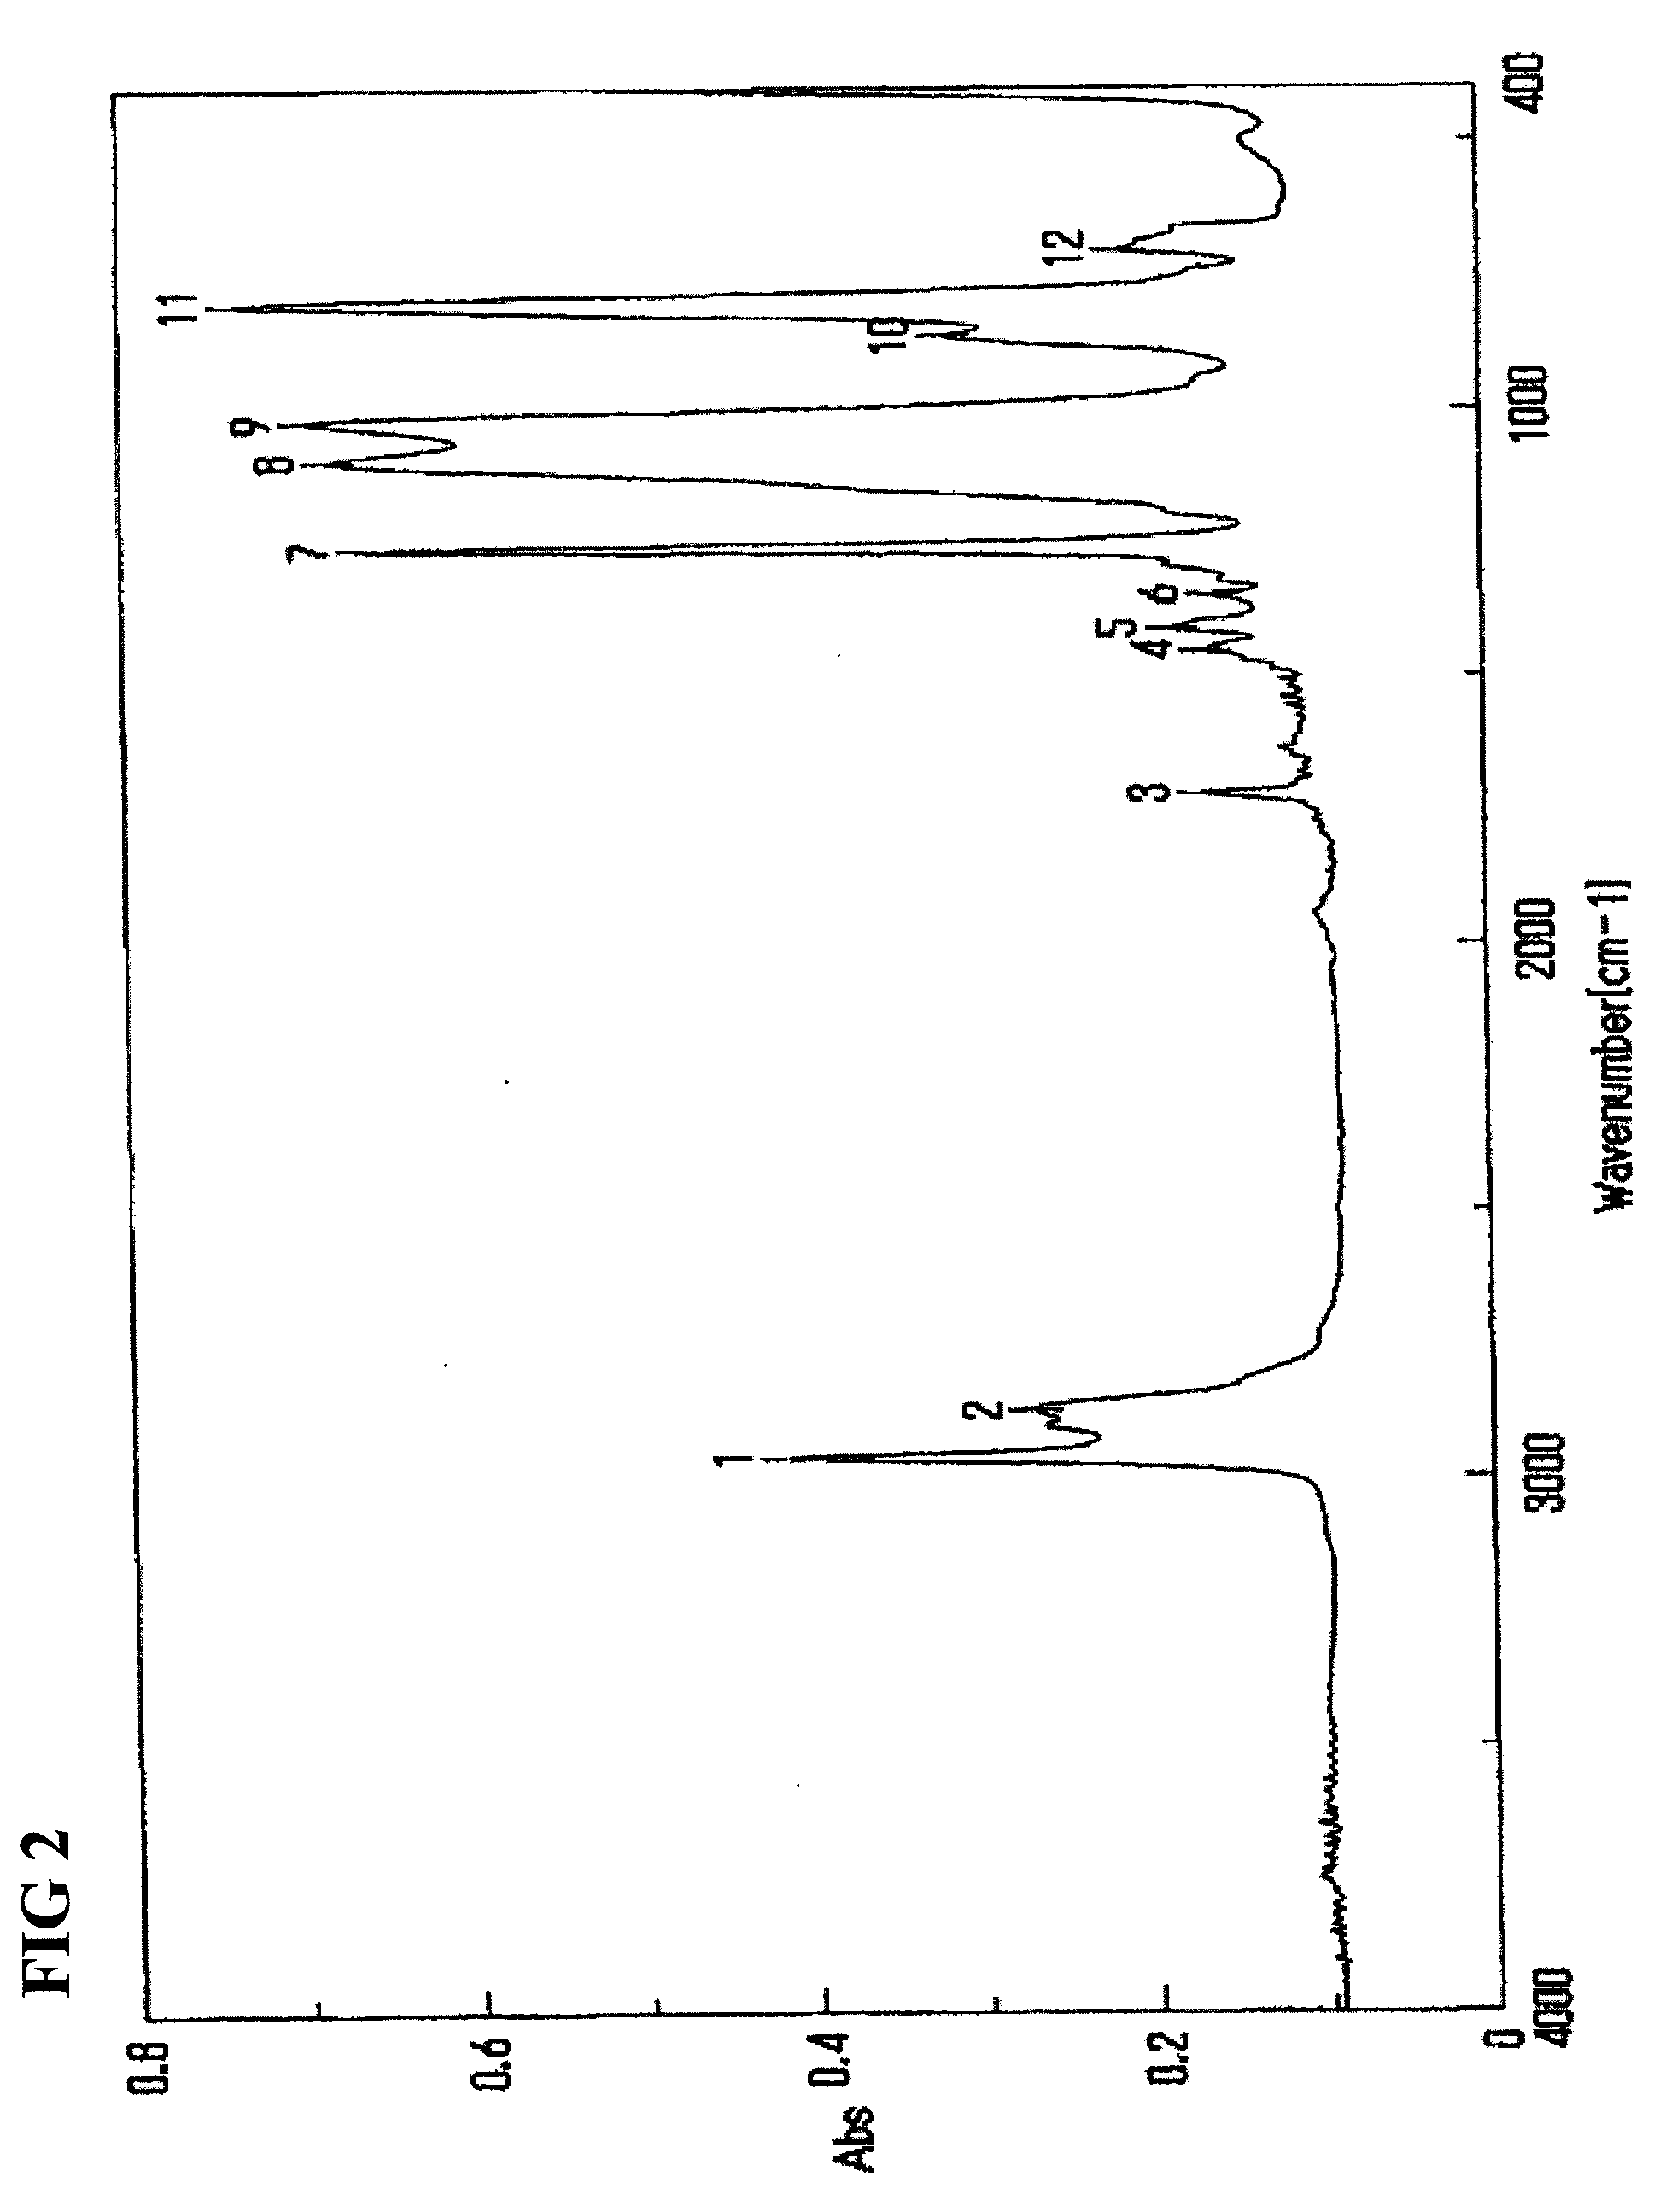 Hydrophilic Polysiloxane Macromonomer, and Production and Use of the same